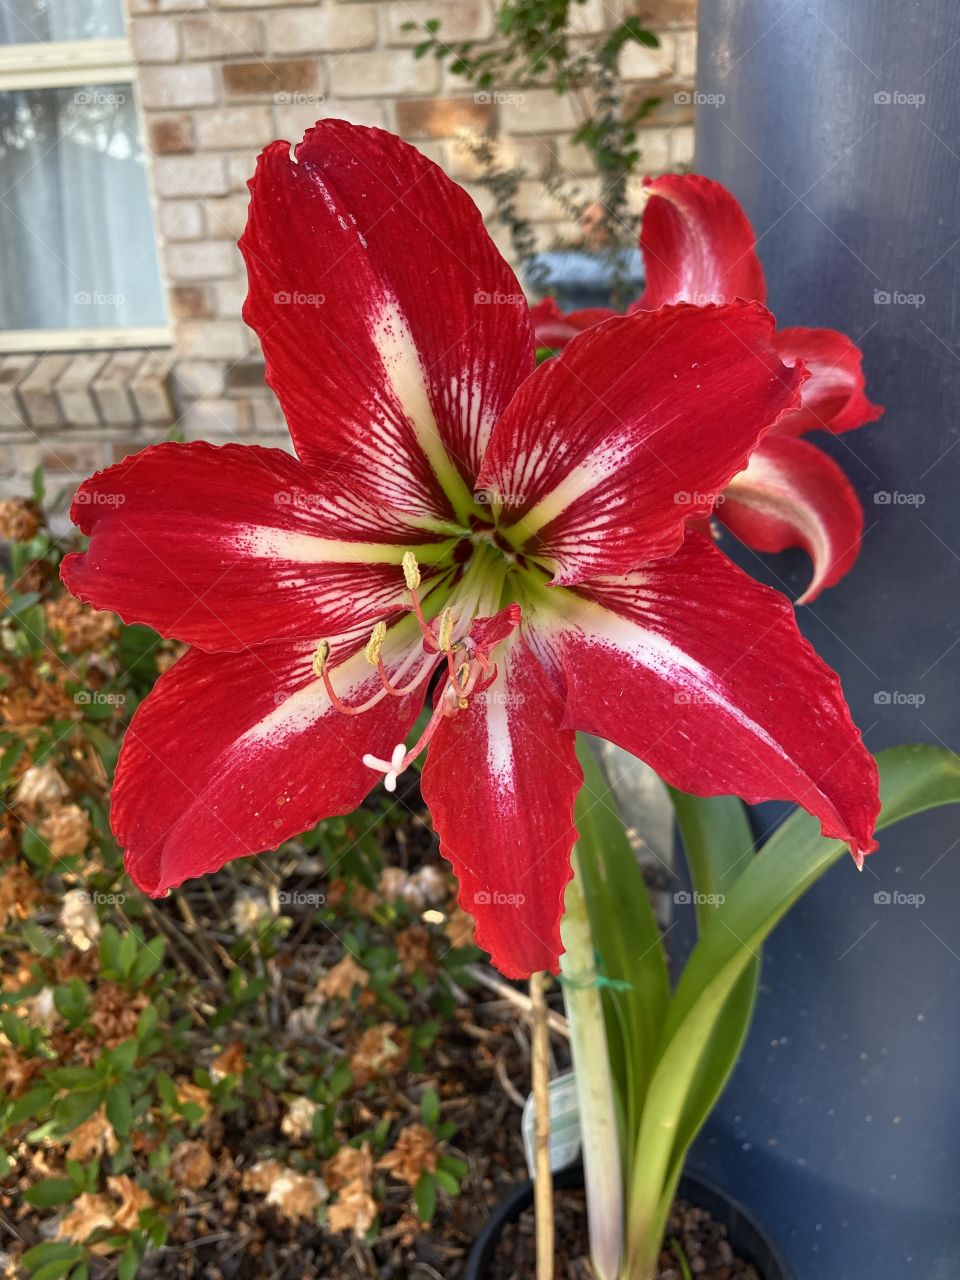 Blossoming vibrant red lilly, November is here.